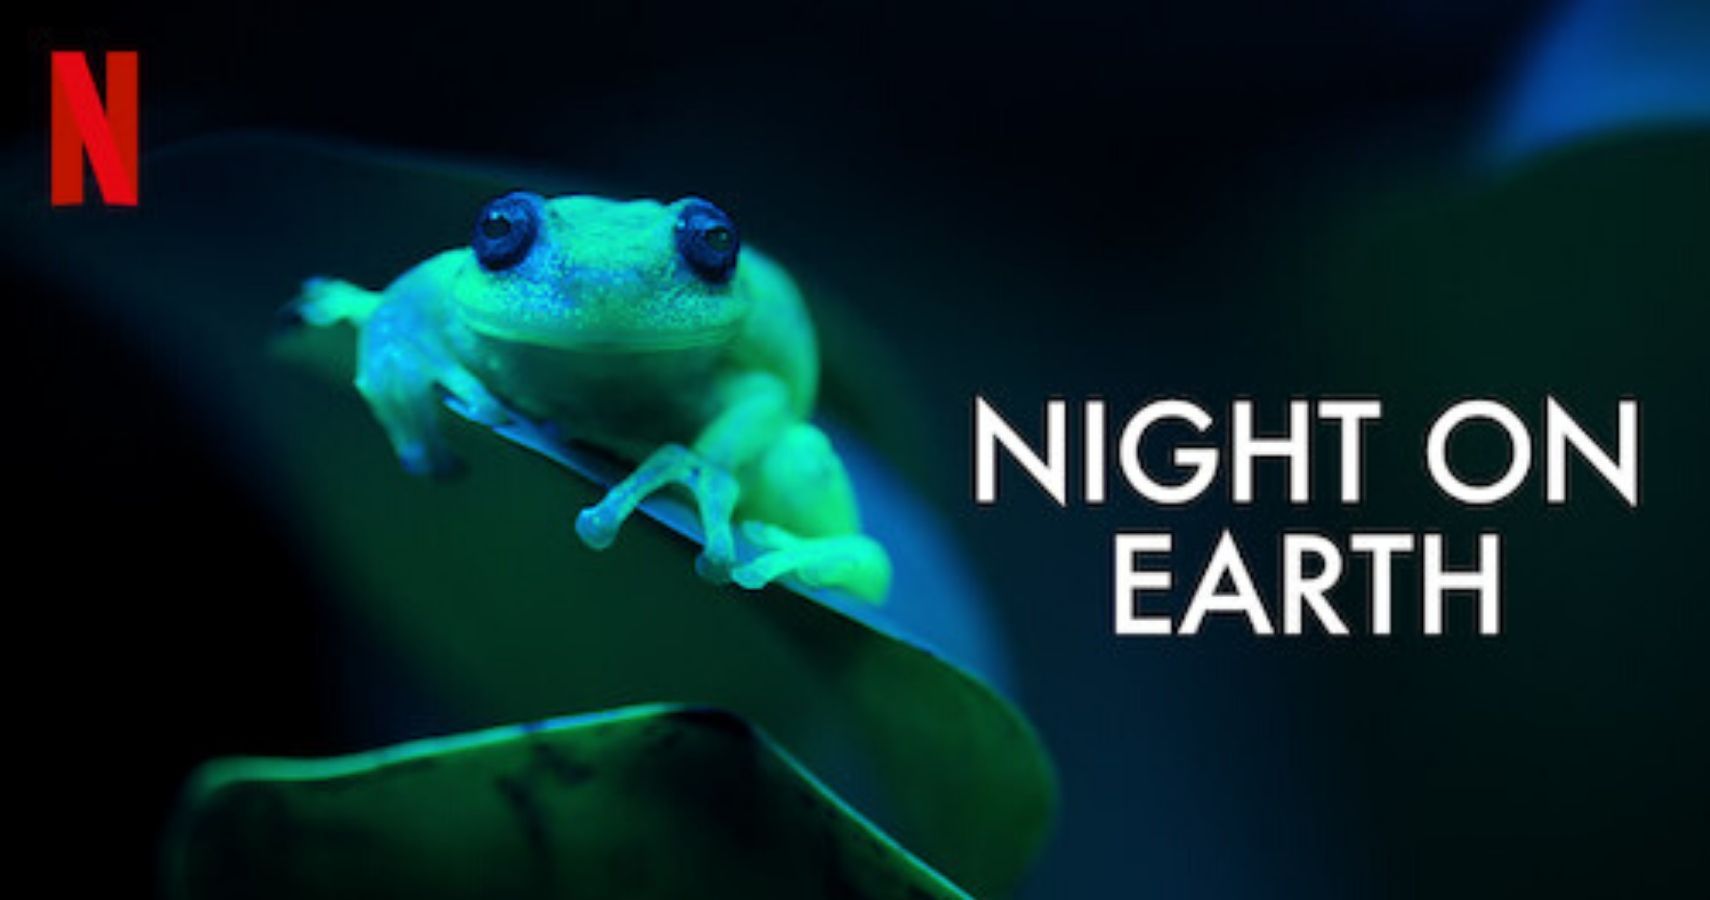 The title screen for Night on Earth showing a glowing frog on a leaf.